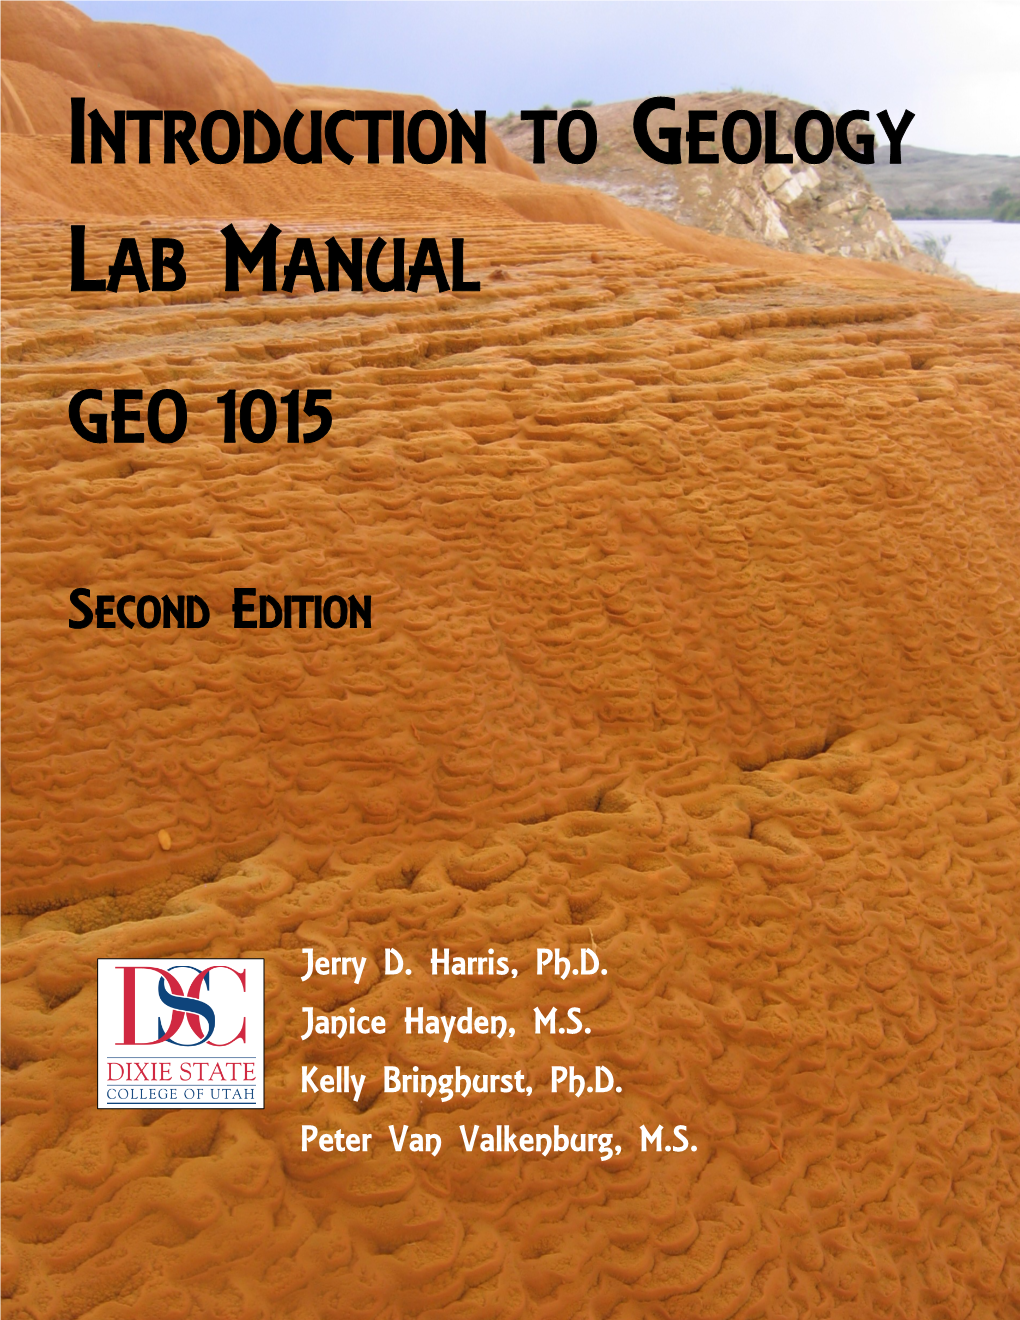 Introduction to Geology Lab Manual Geo 1015